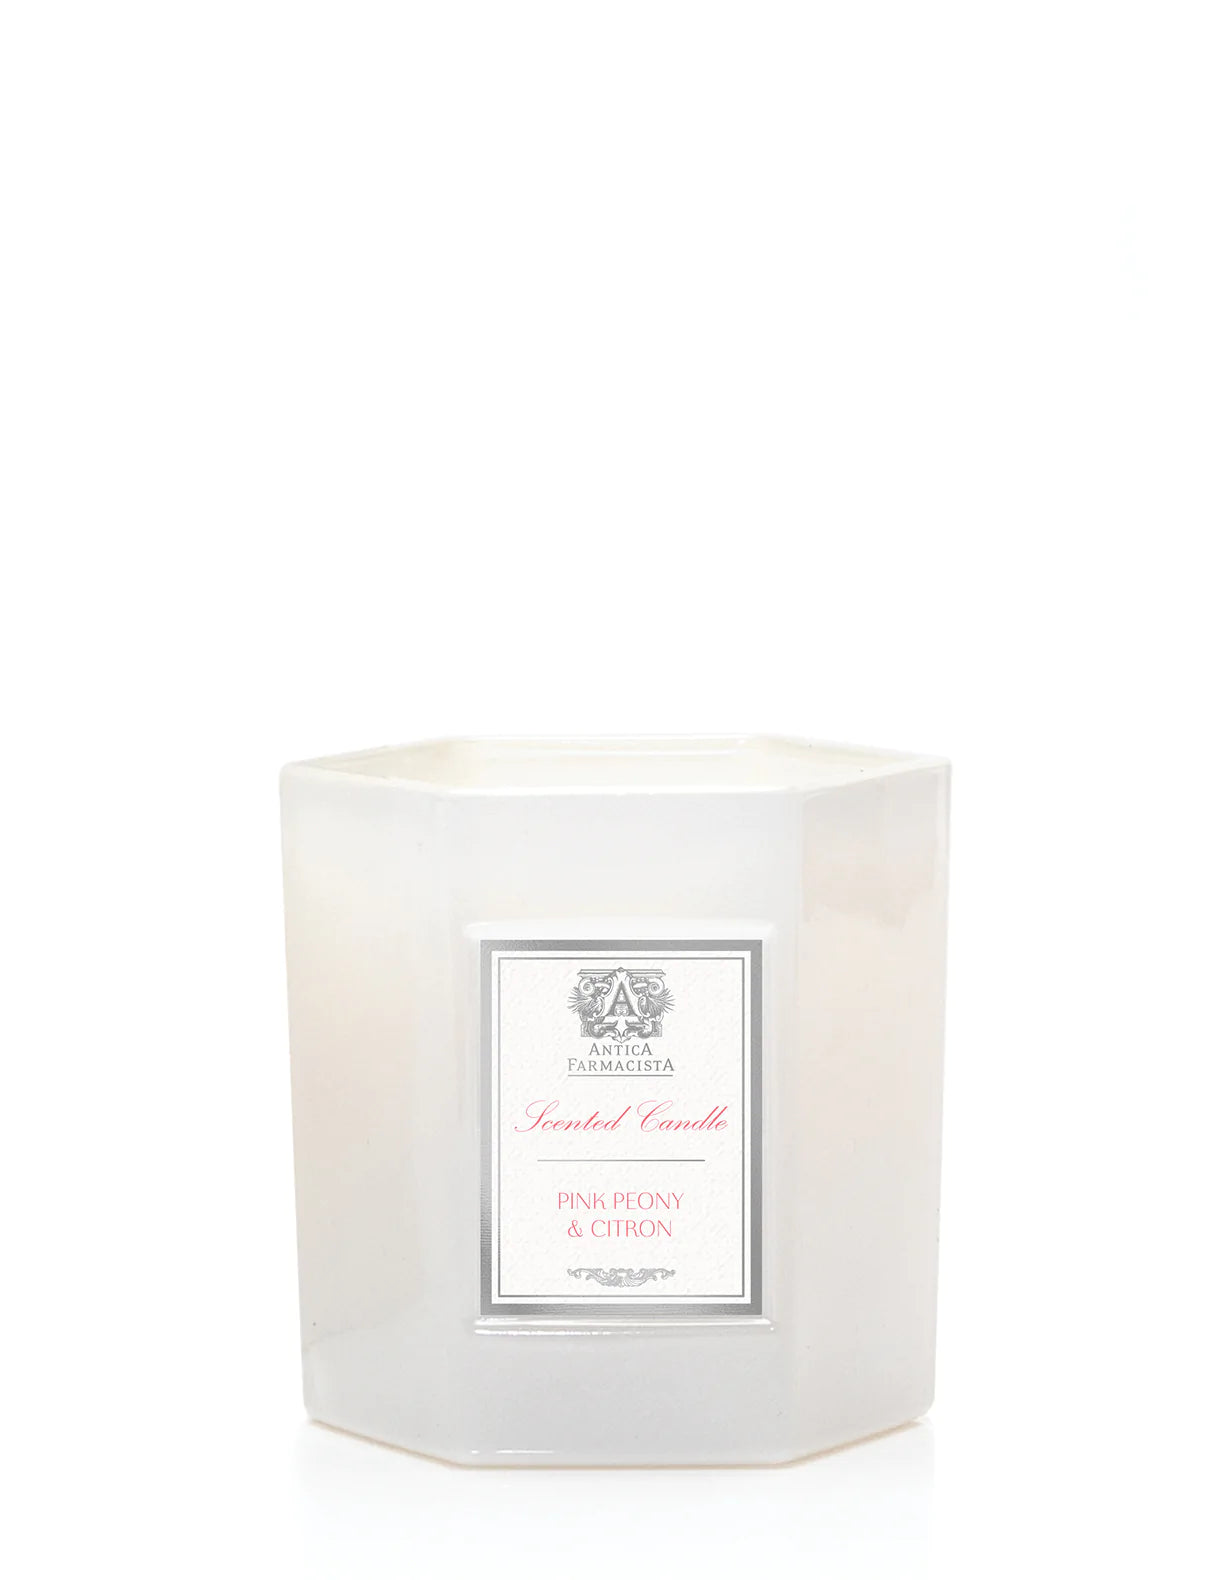 Antica Hexa Candle 9oz Candles in Pink Peony & Citron at Wrapsody